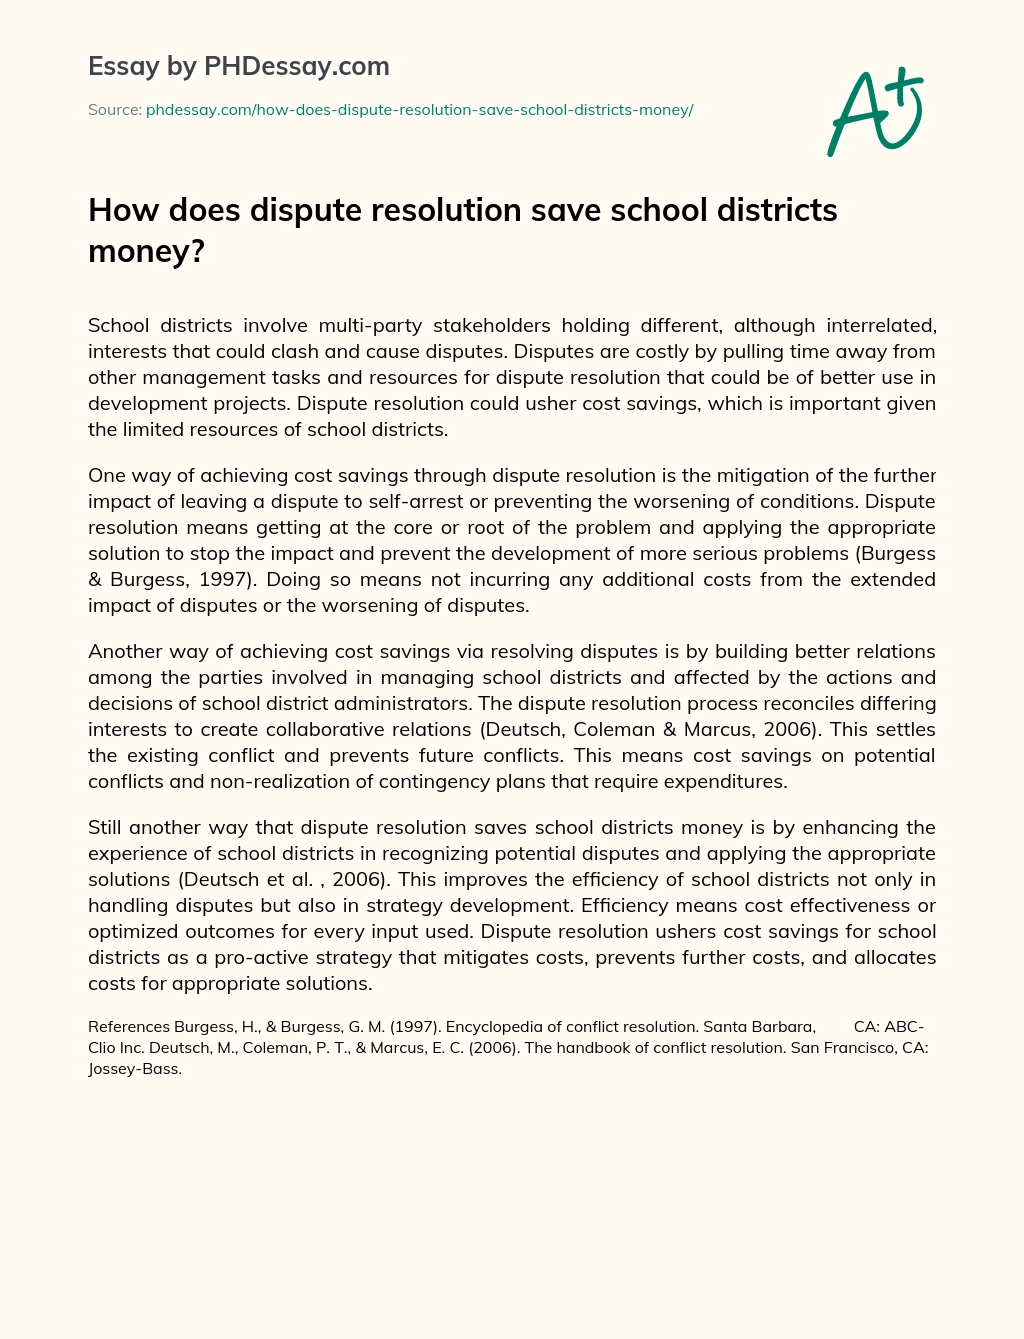 How does dispute resolution save school districts money? essay